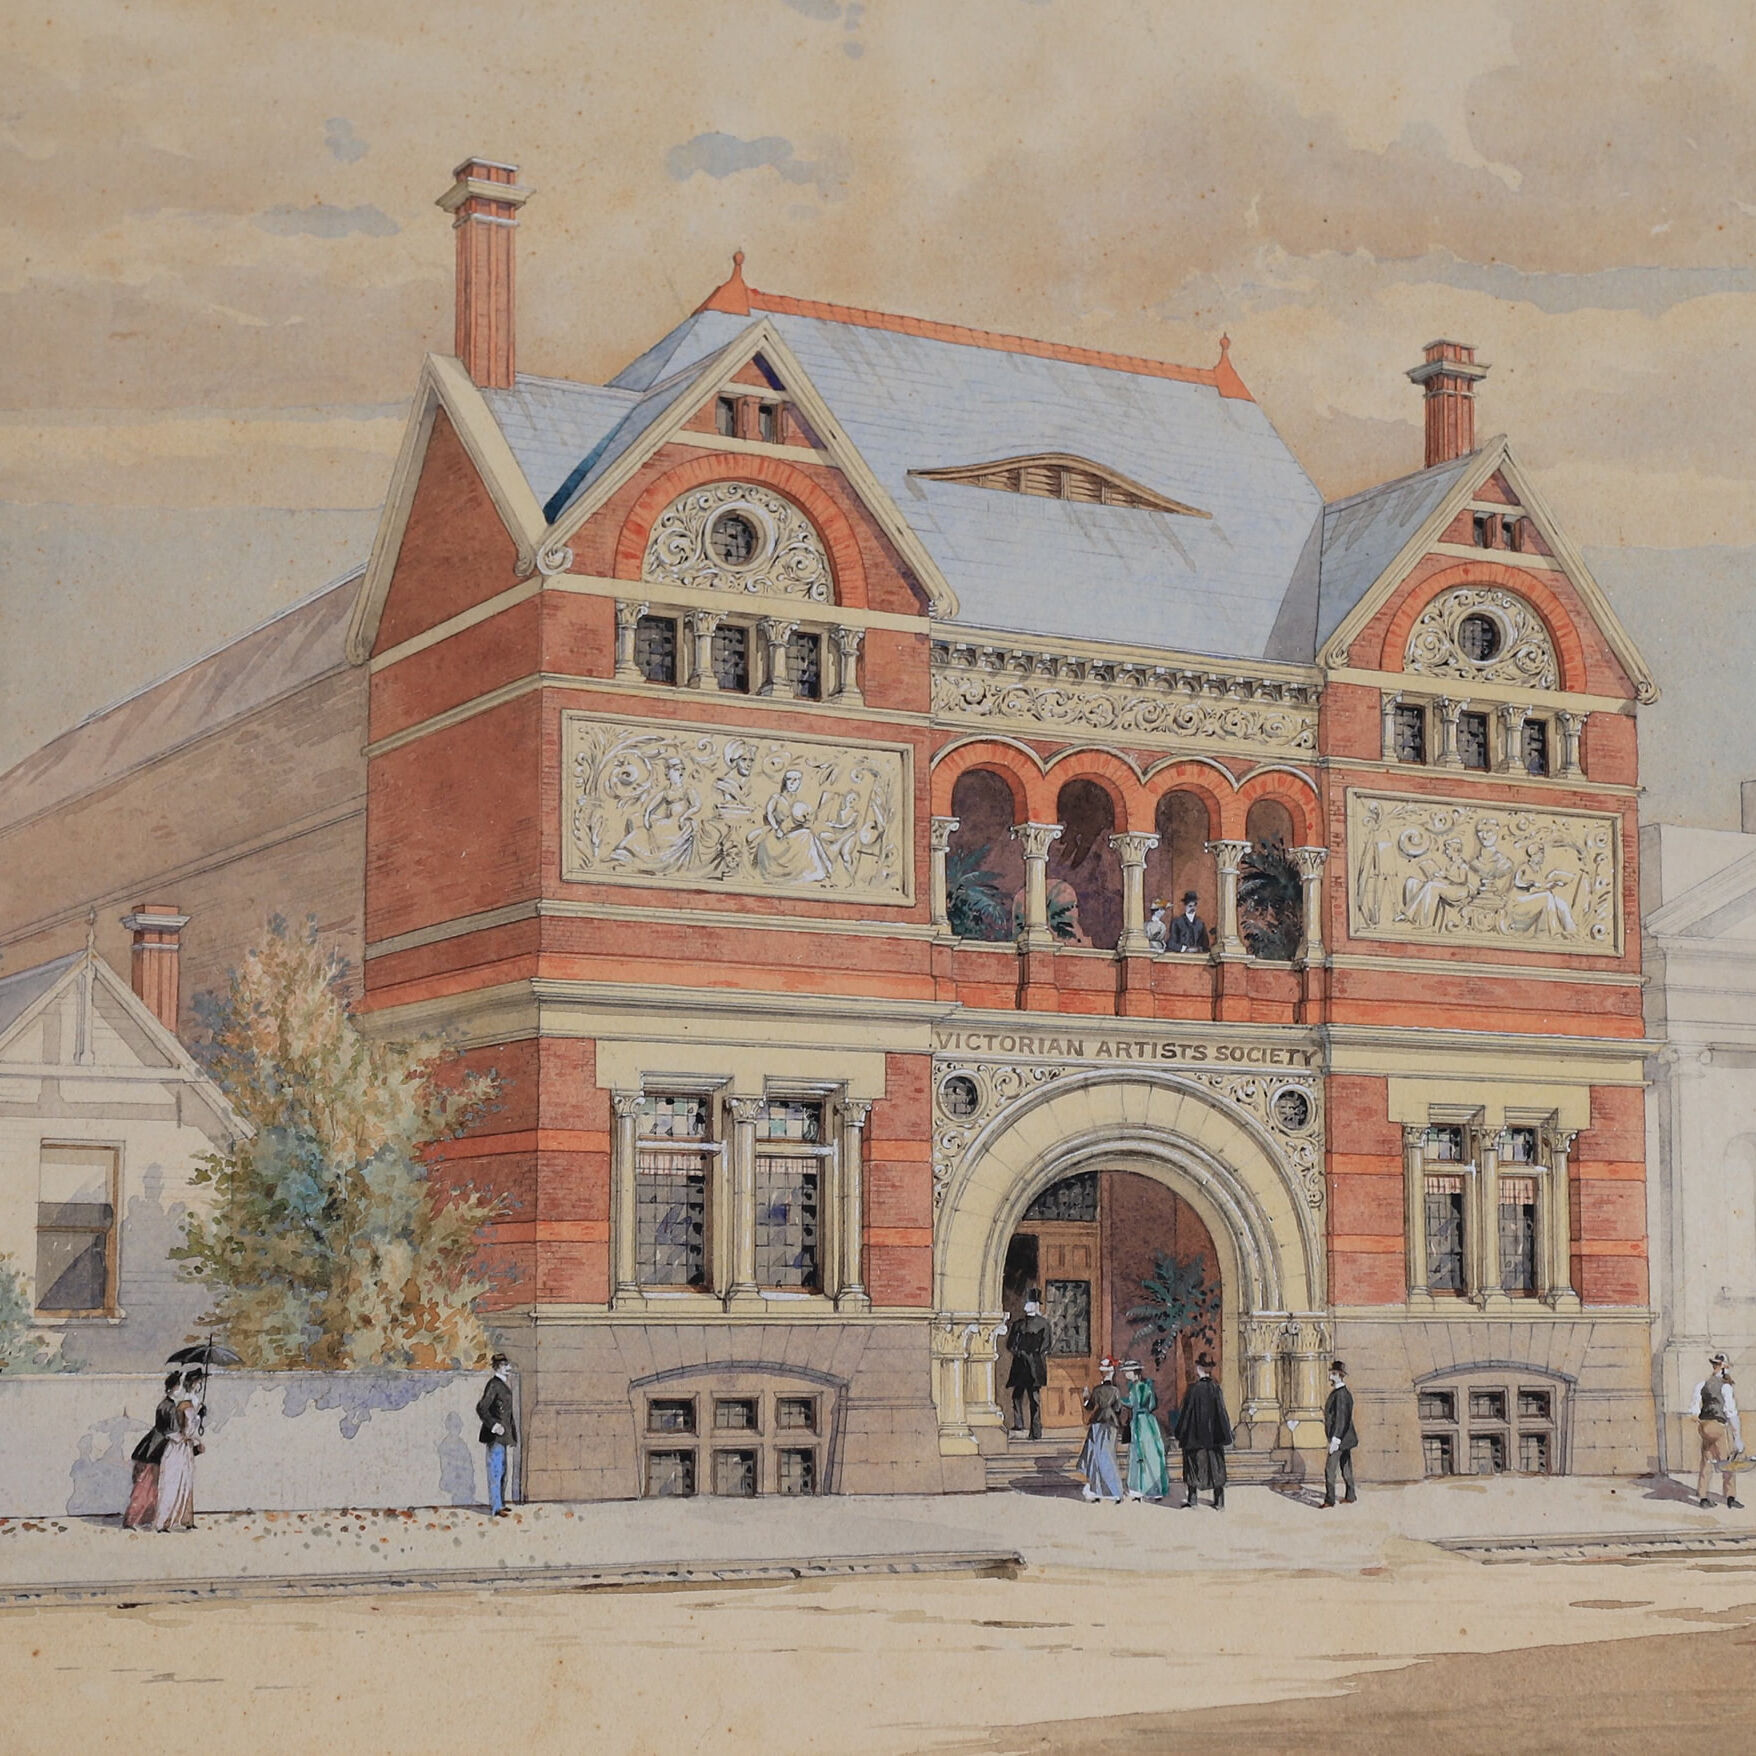 01B_HISTORY__Watercolour on board by Wiliam Tibbits_Painting of Building From Andrew MacKenzie (1)